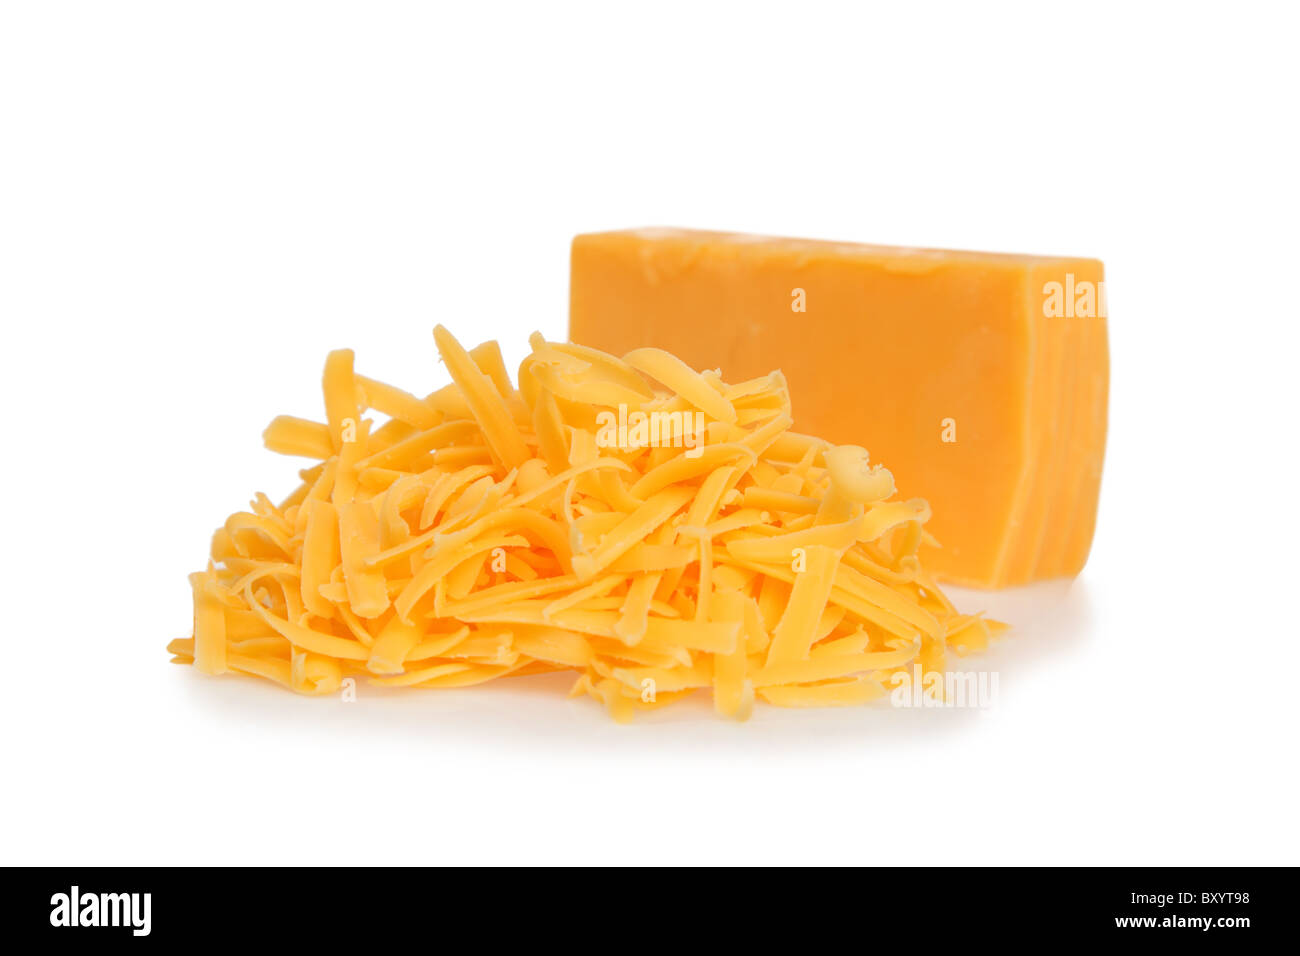 Grated cheddar cheese on white background Stock Photo